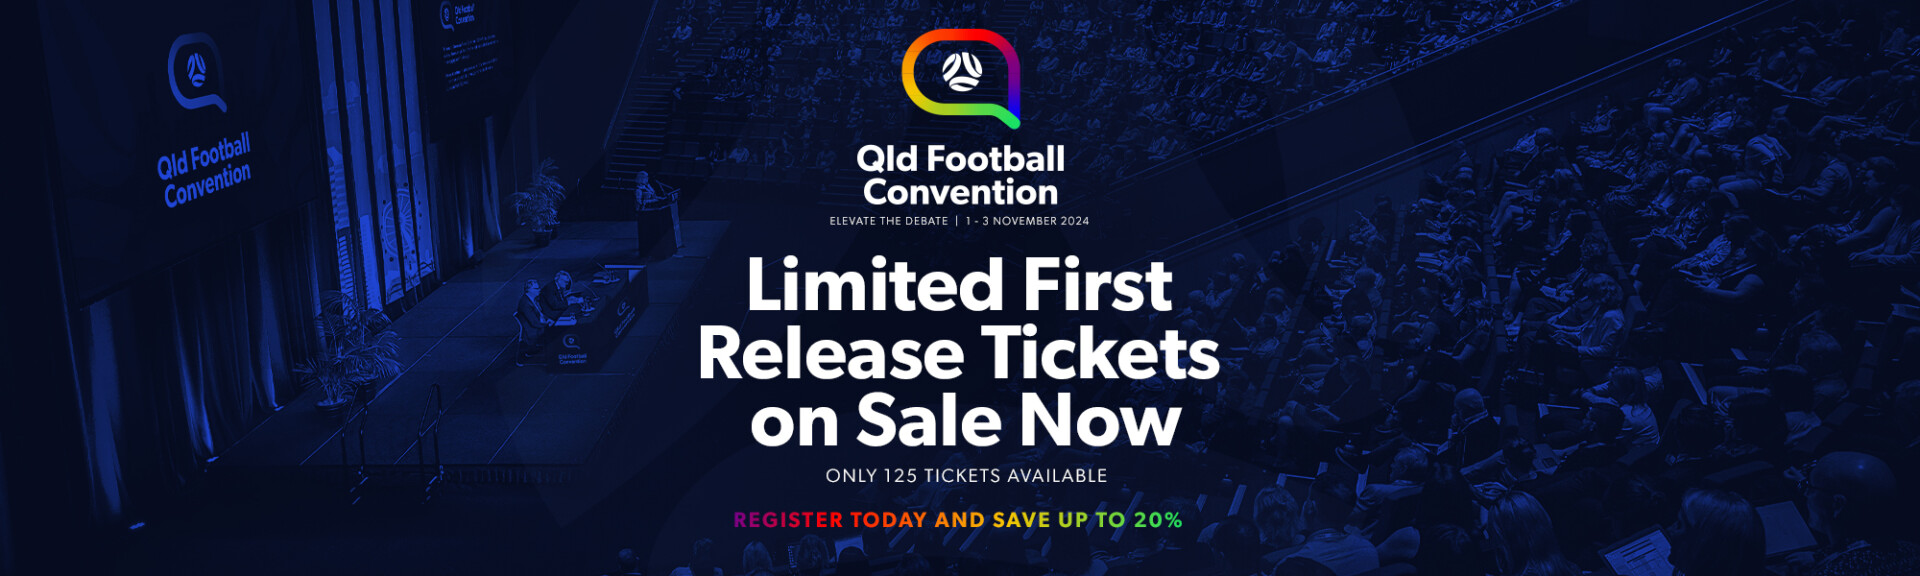 2403006 - Events - Queensland Football Convention - Tickets - Web Banner - Limited Release